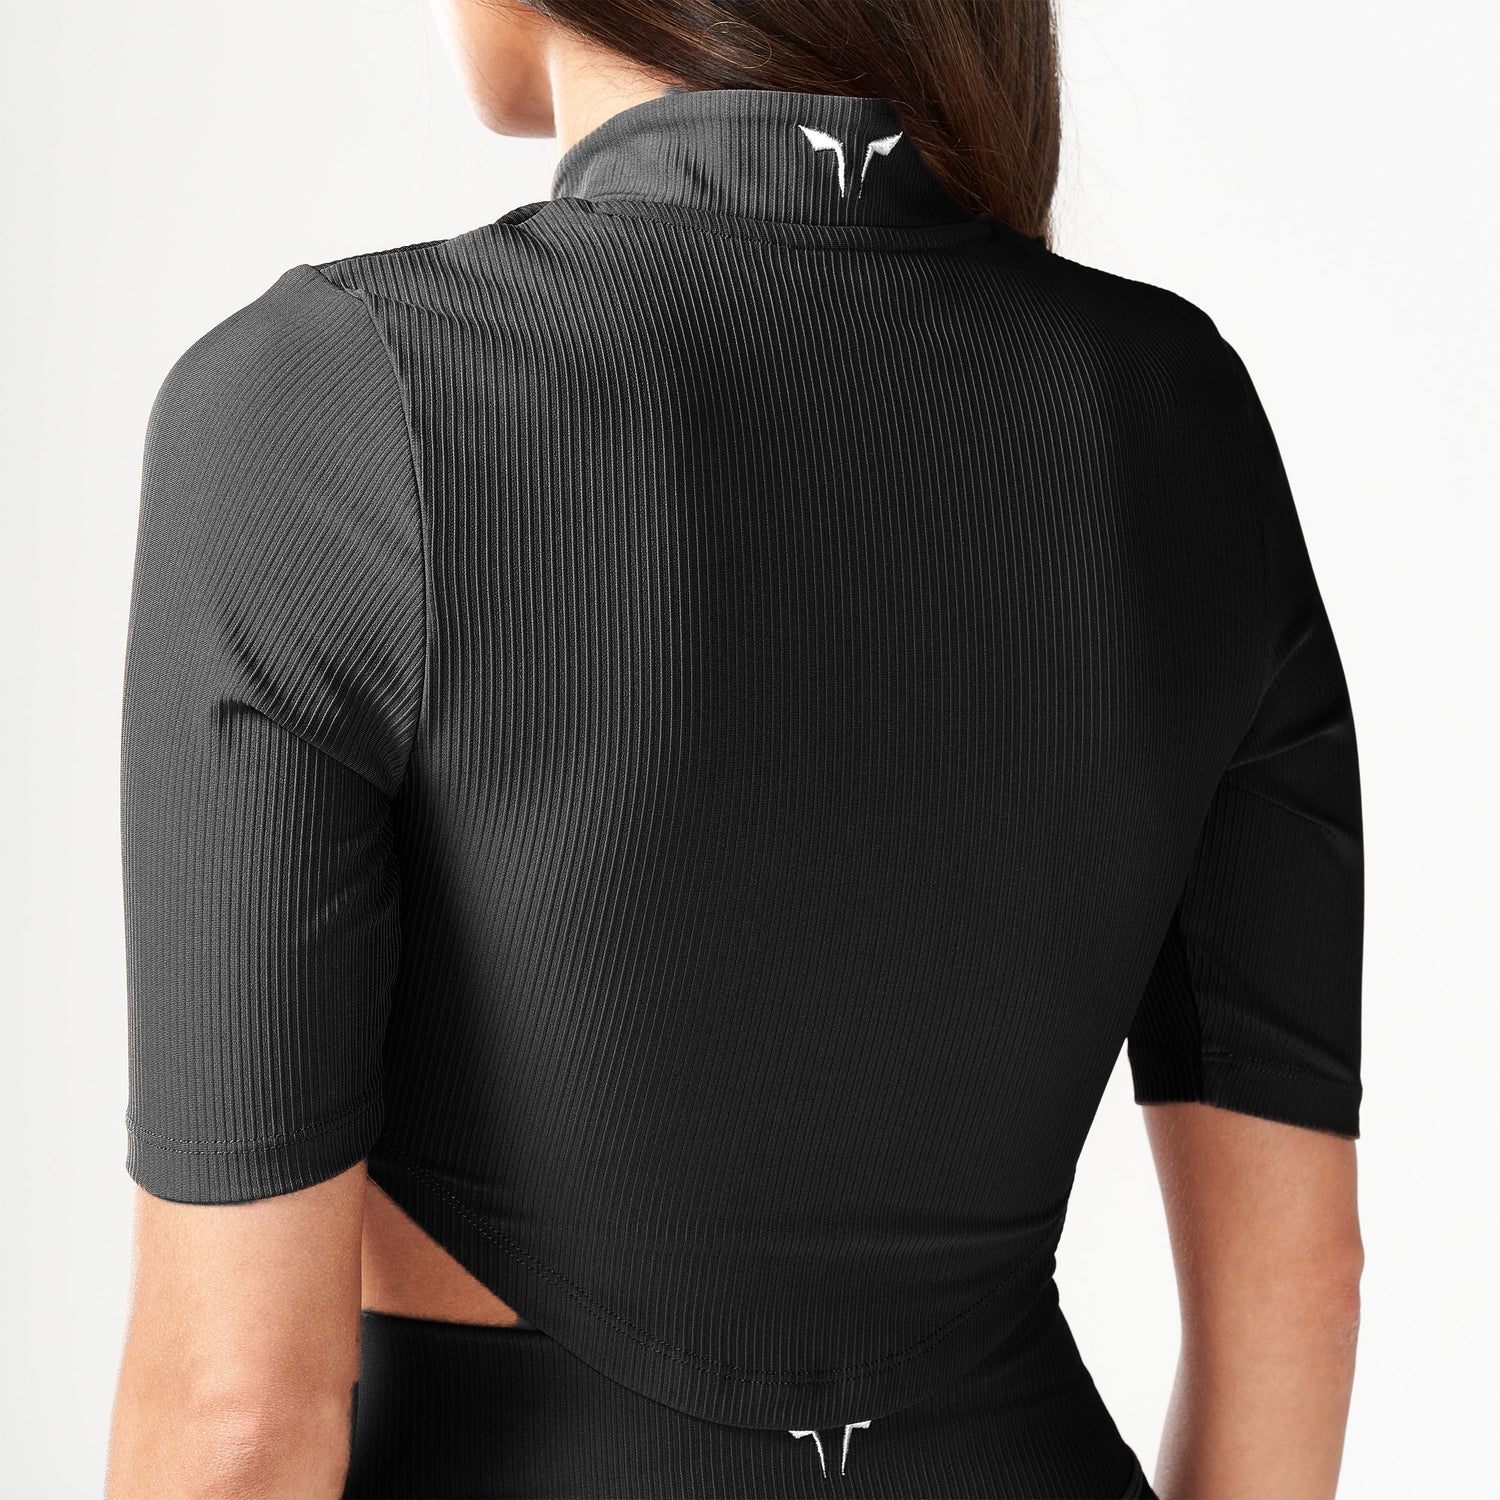 Ribbed Assymetrical Active Wear Top - Style Limits